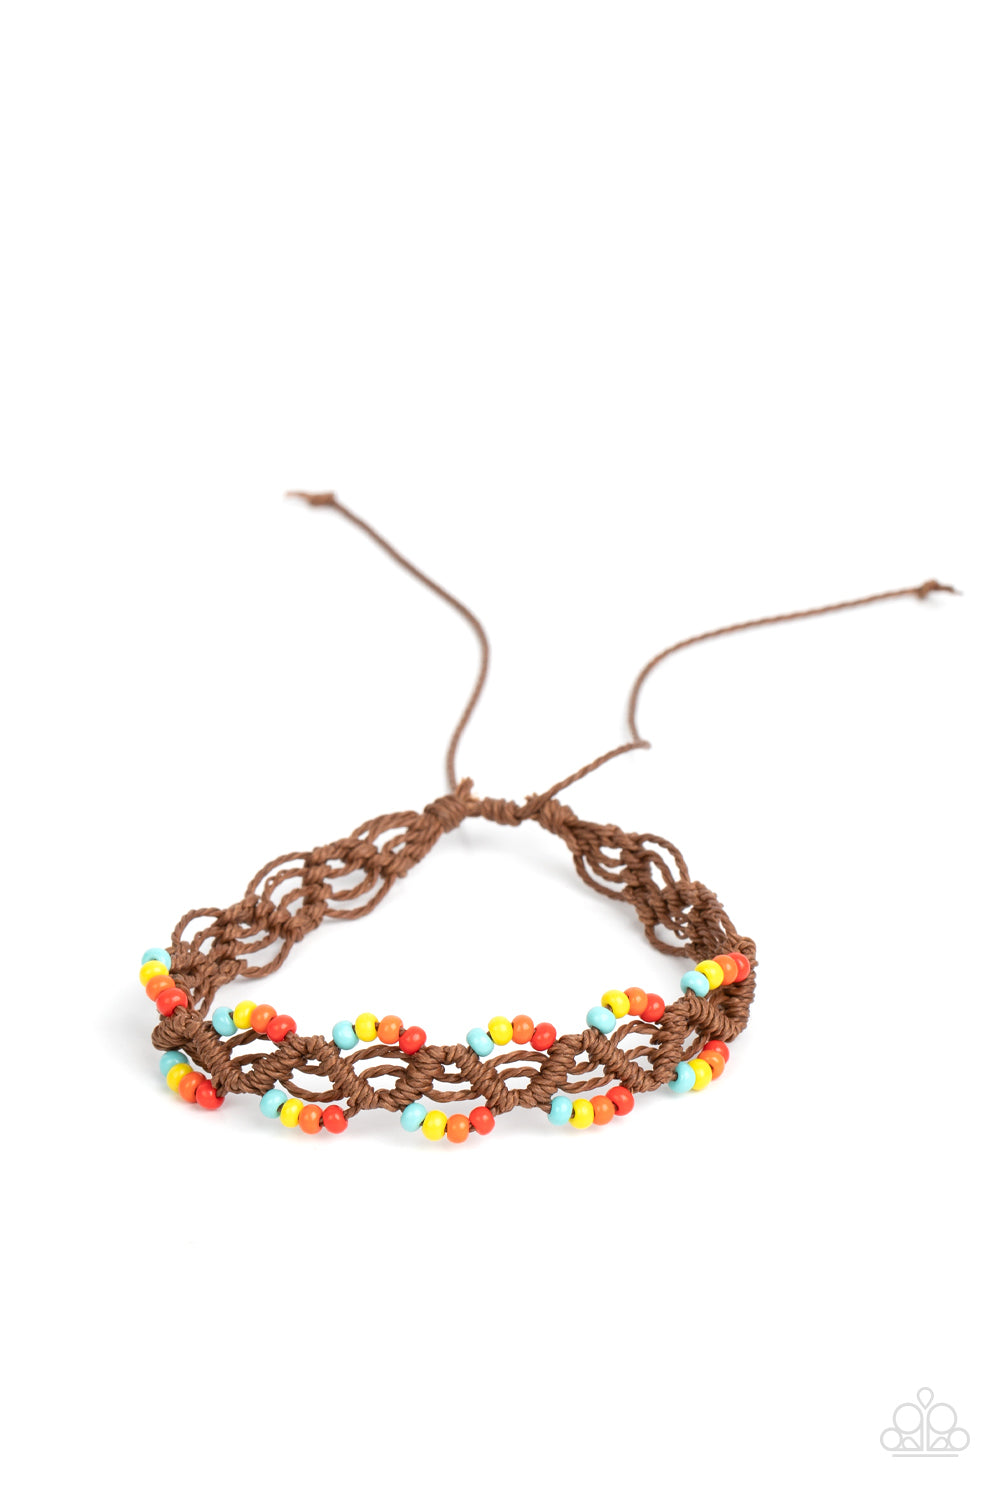 Cast a Wide Net - Multi Seed Beads/Twisted Brown Cording Paparazzi Urban Bracelet